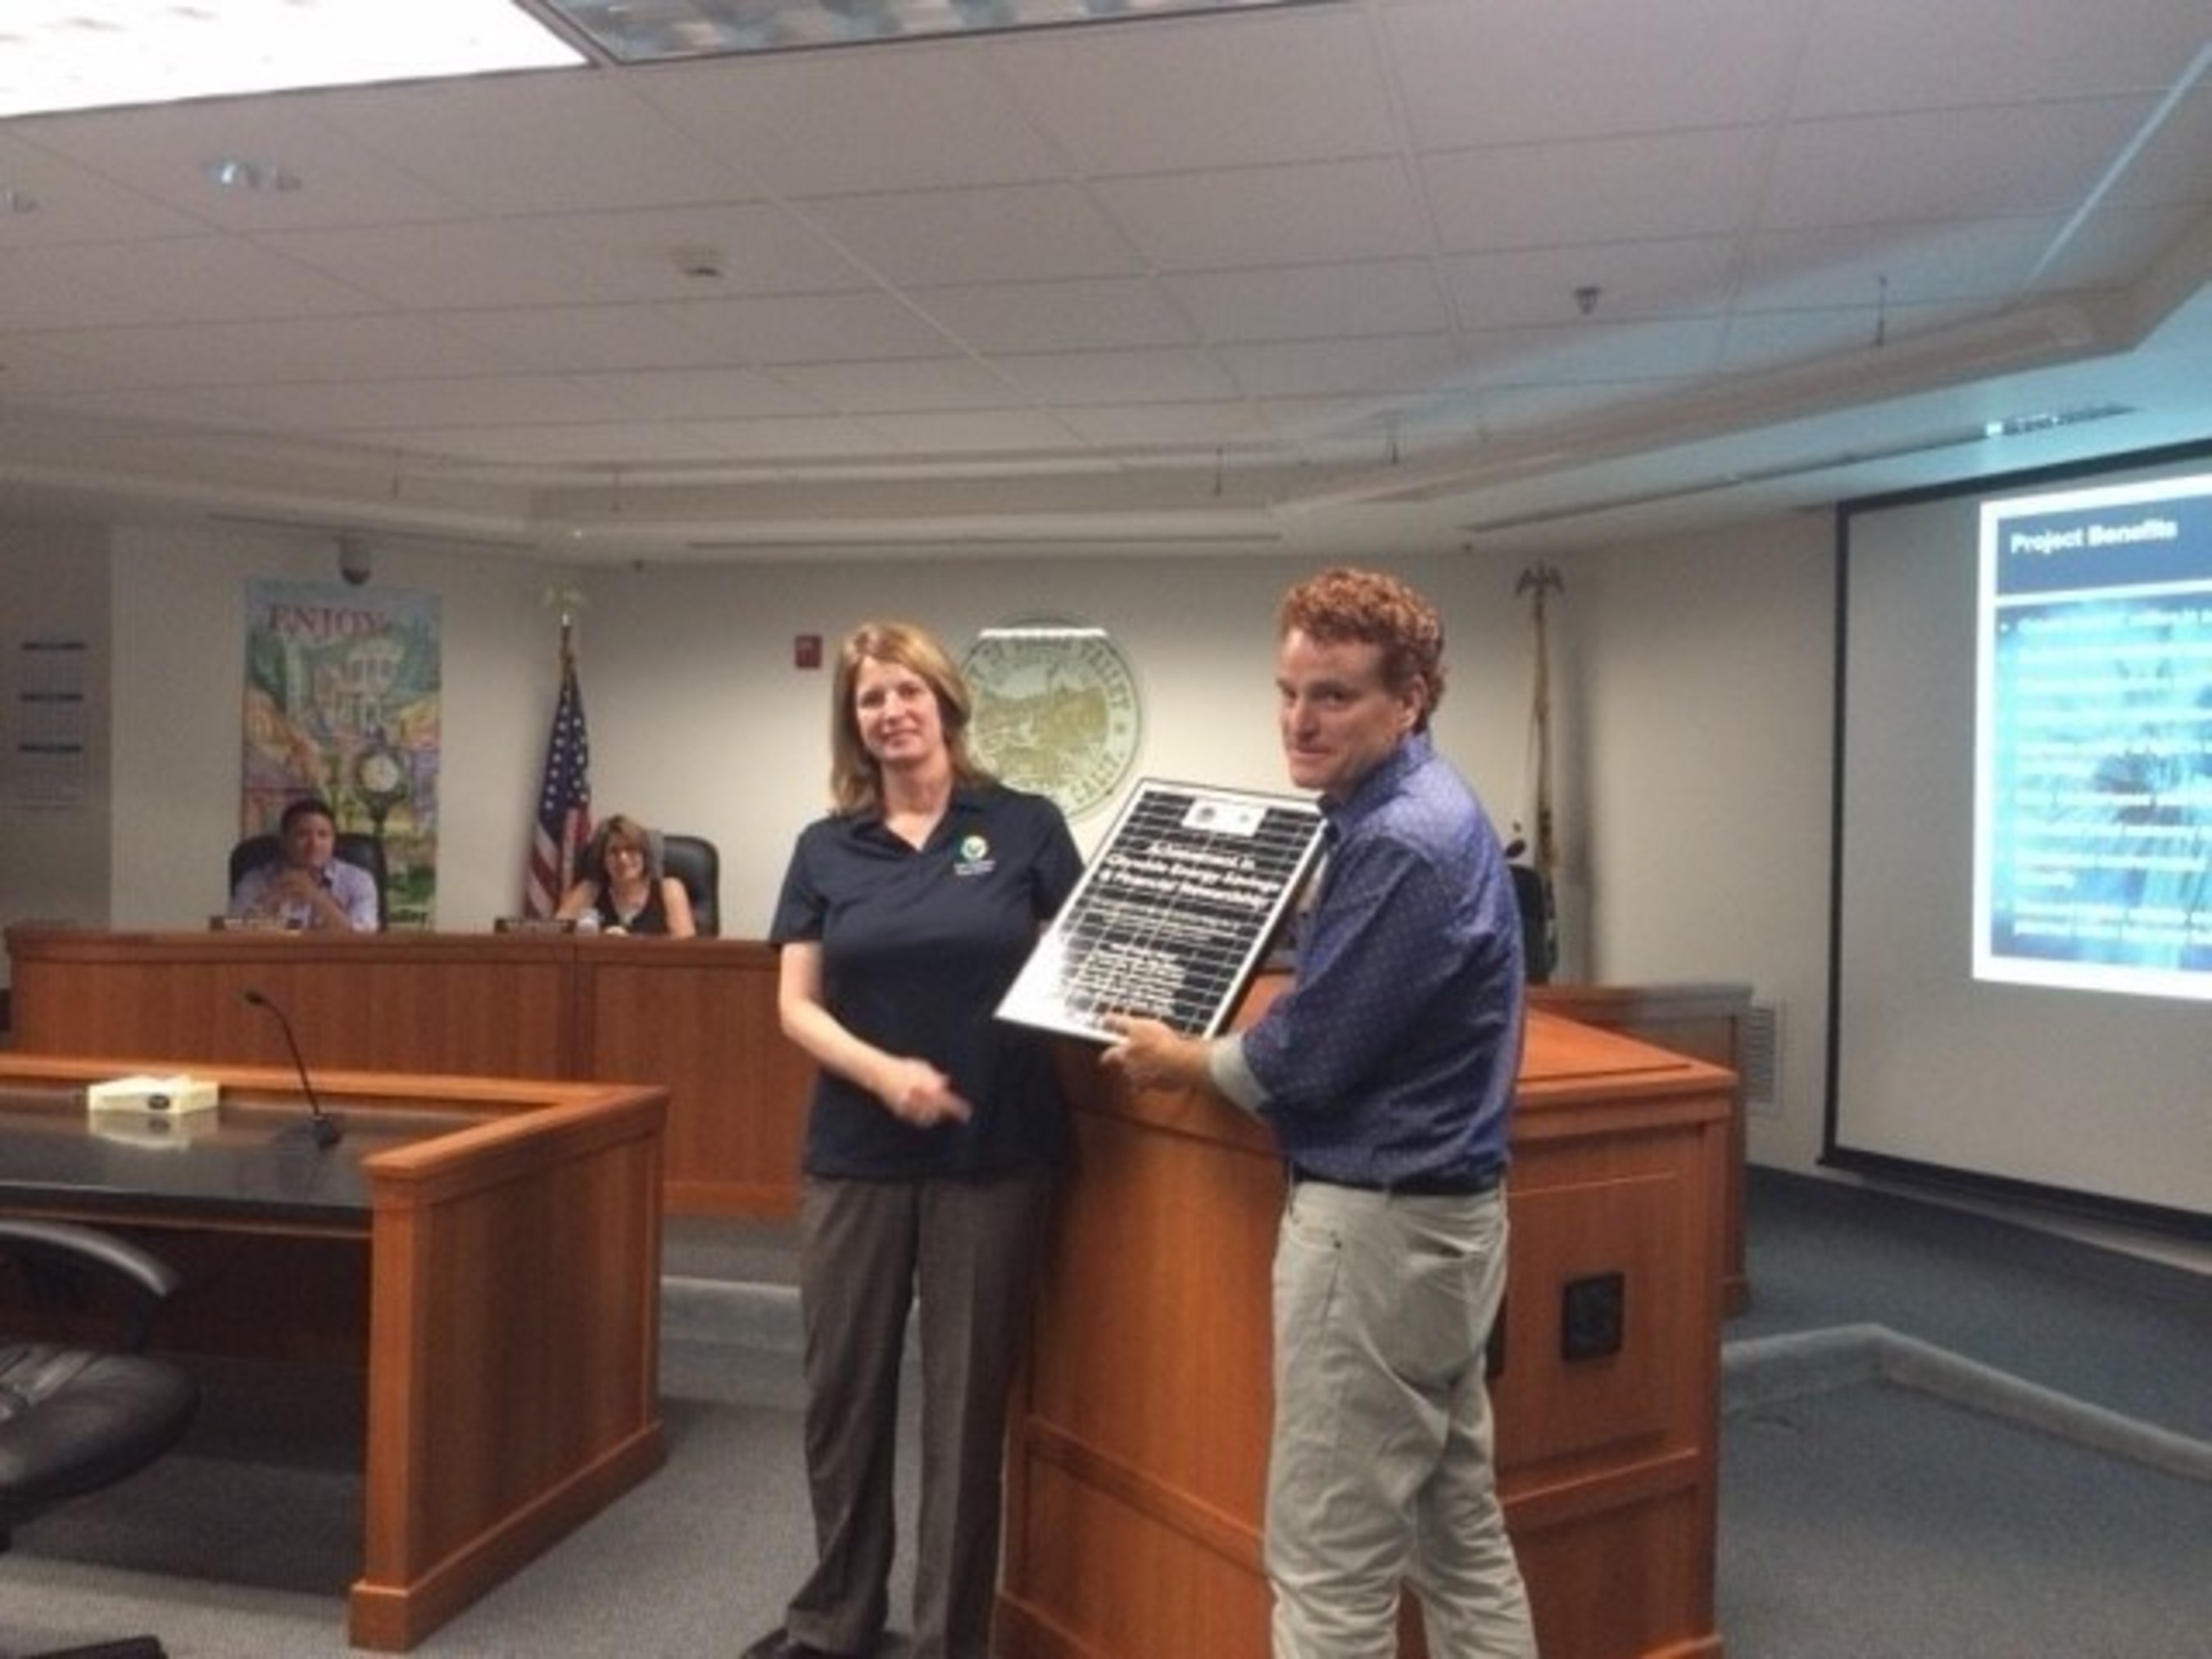 City of Grass Valley receives recognition for achievements in sustainability from OpTerra Energy Services at the June 28th City Council Meeting.